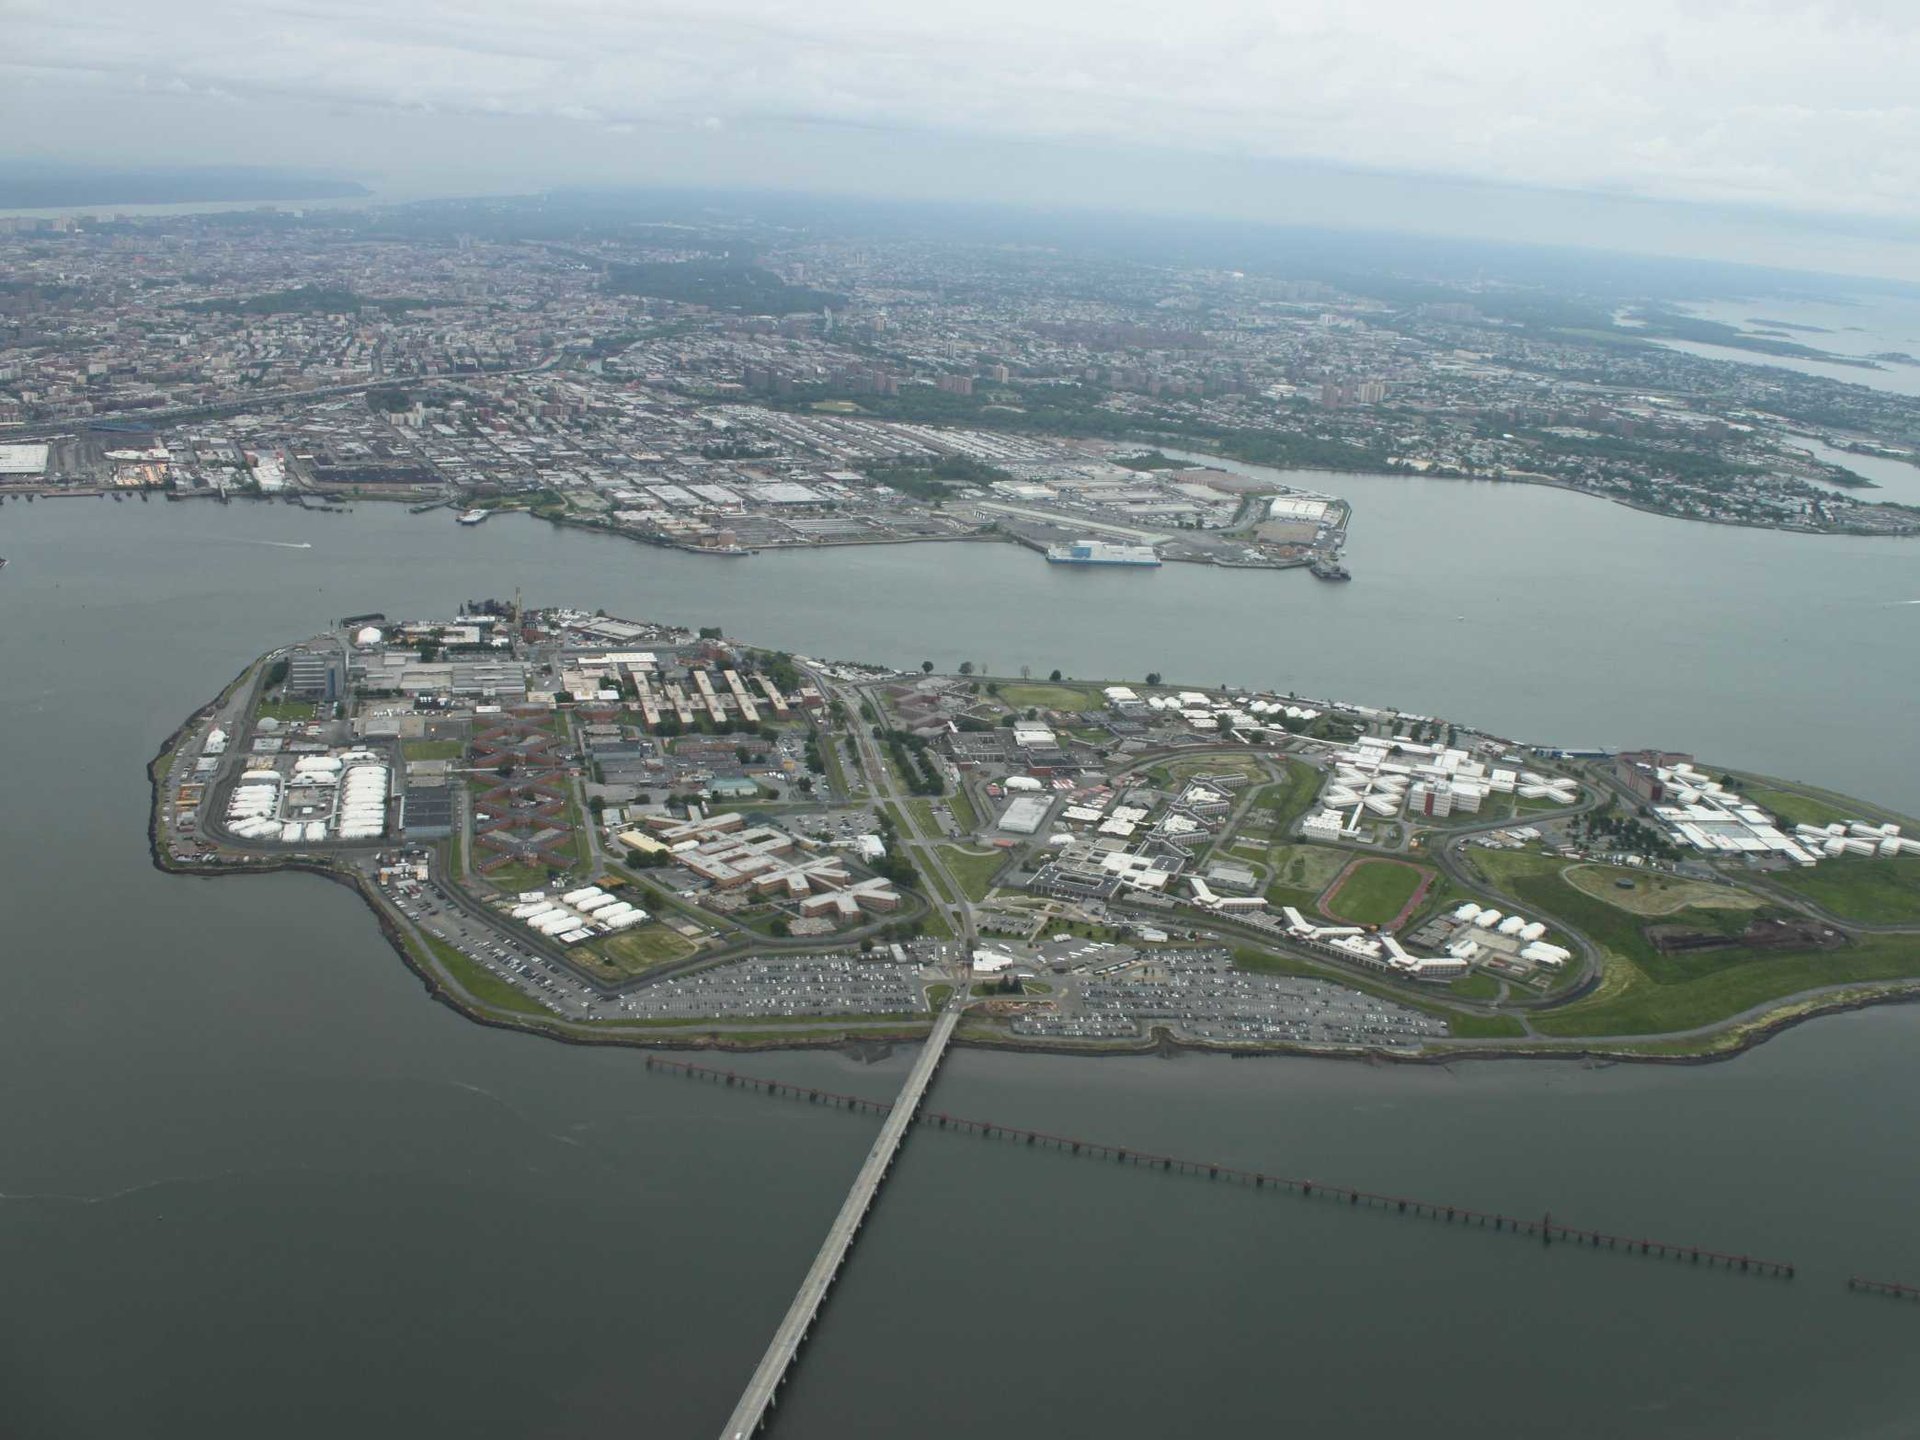 rikers island NYC launches $8.7B jail project to replace Rikers Island facility